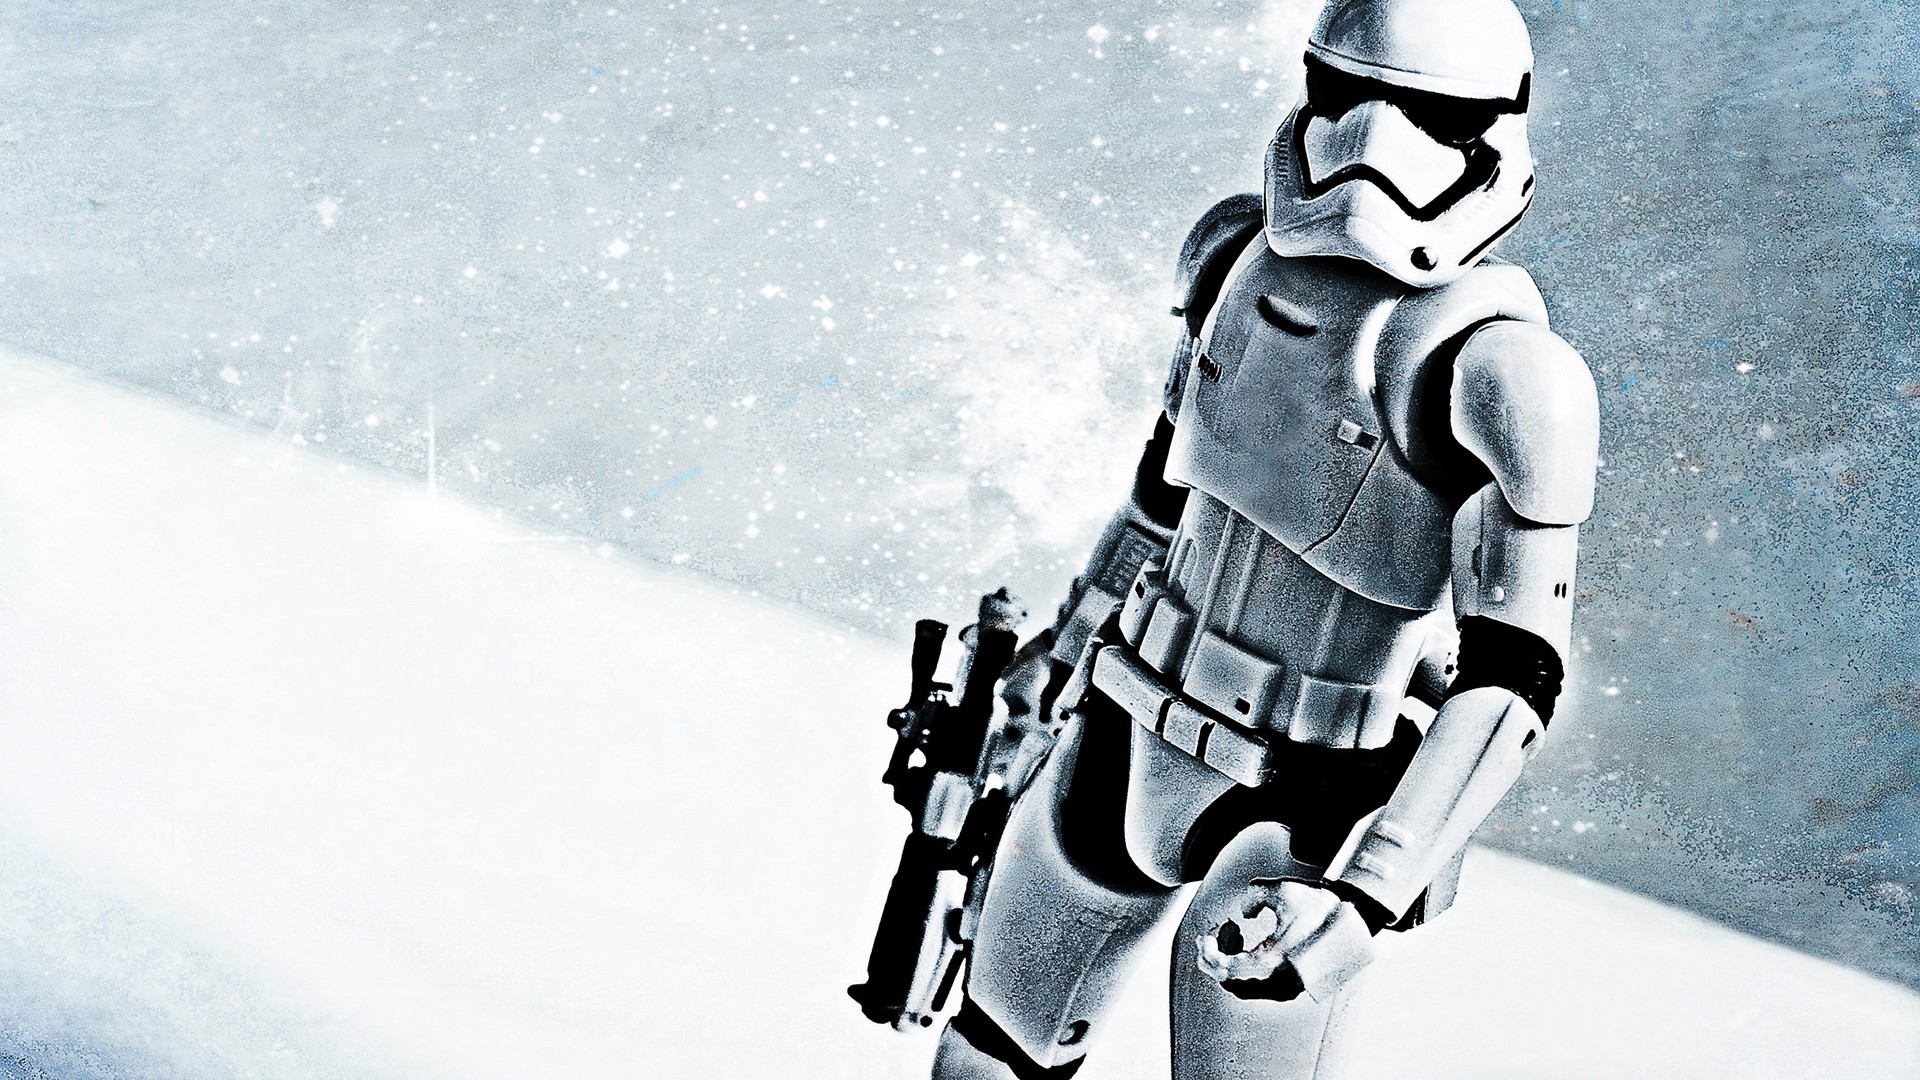 1920x1080  First Order Stormtrooper wallpaper 51+ - Page 3 of 3 - yese69.com  - 4K Wallpapers World